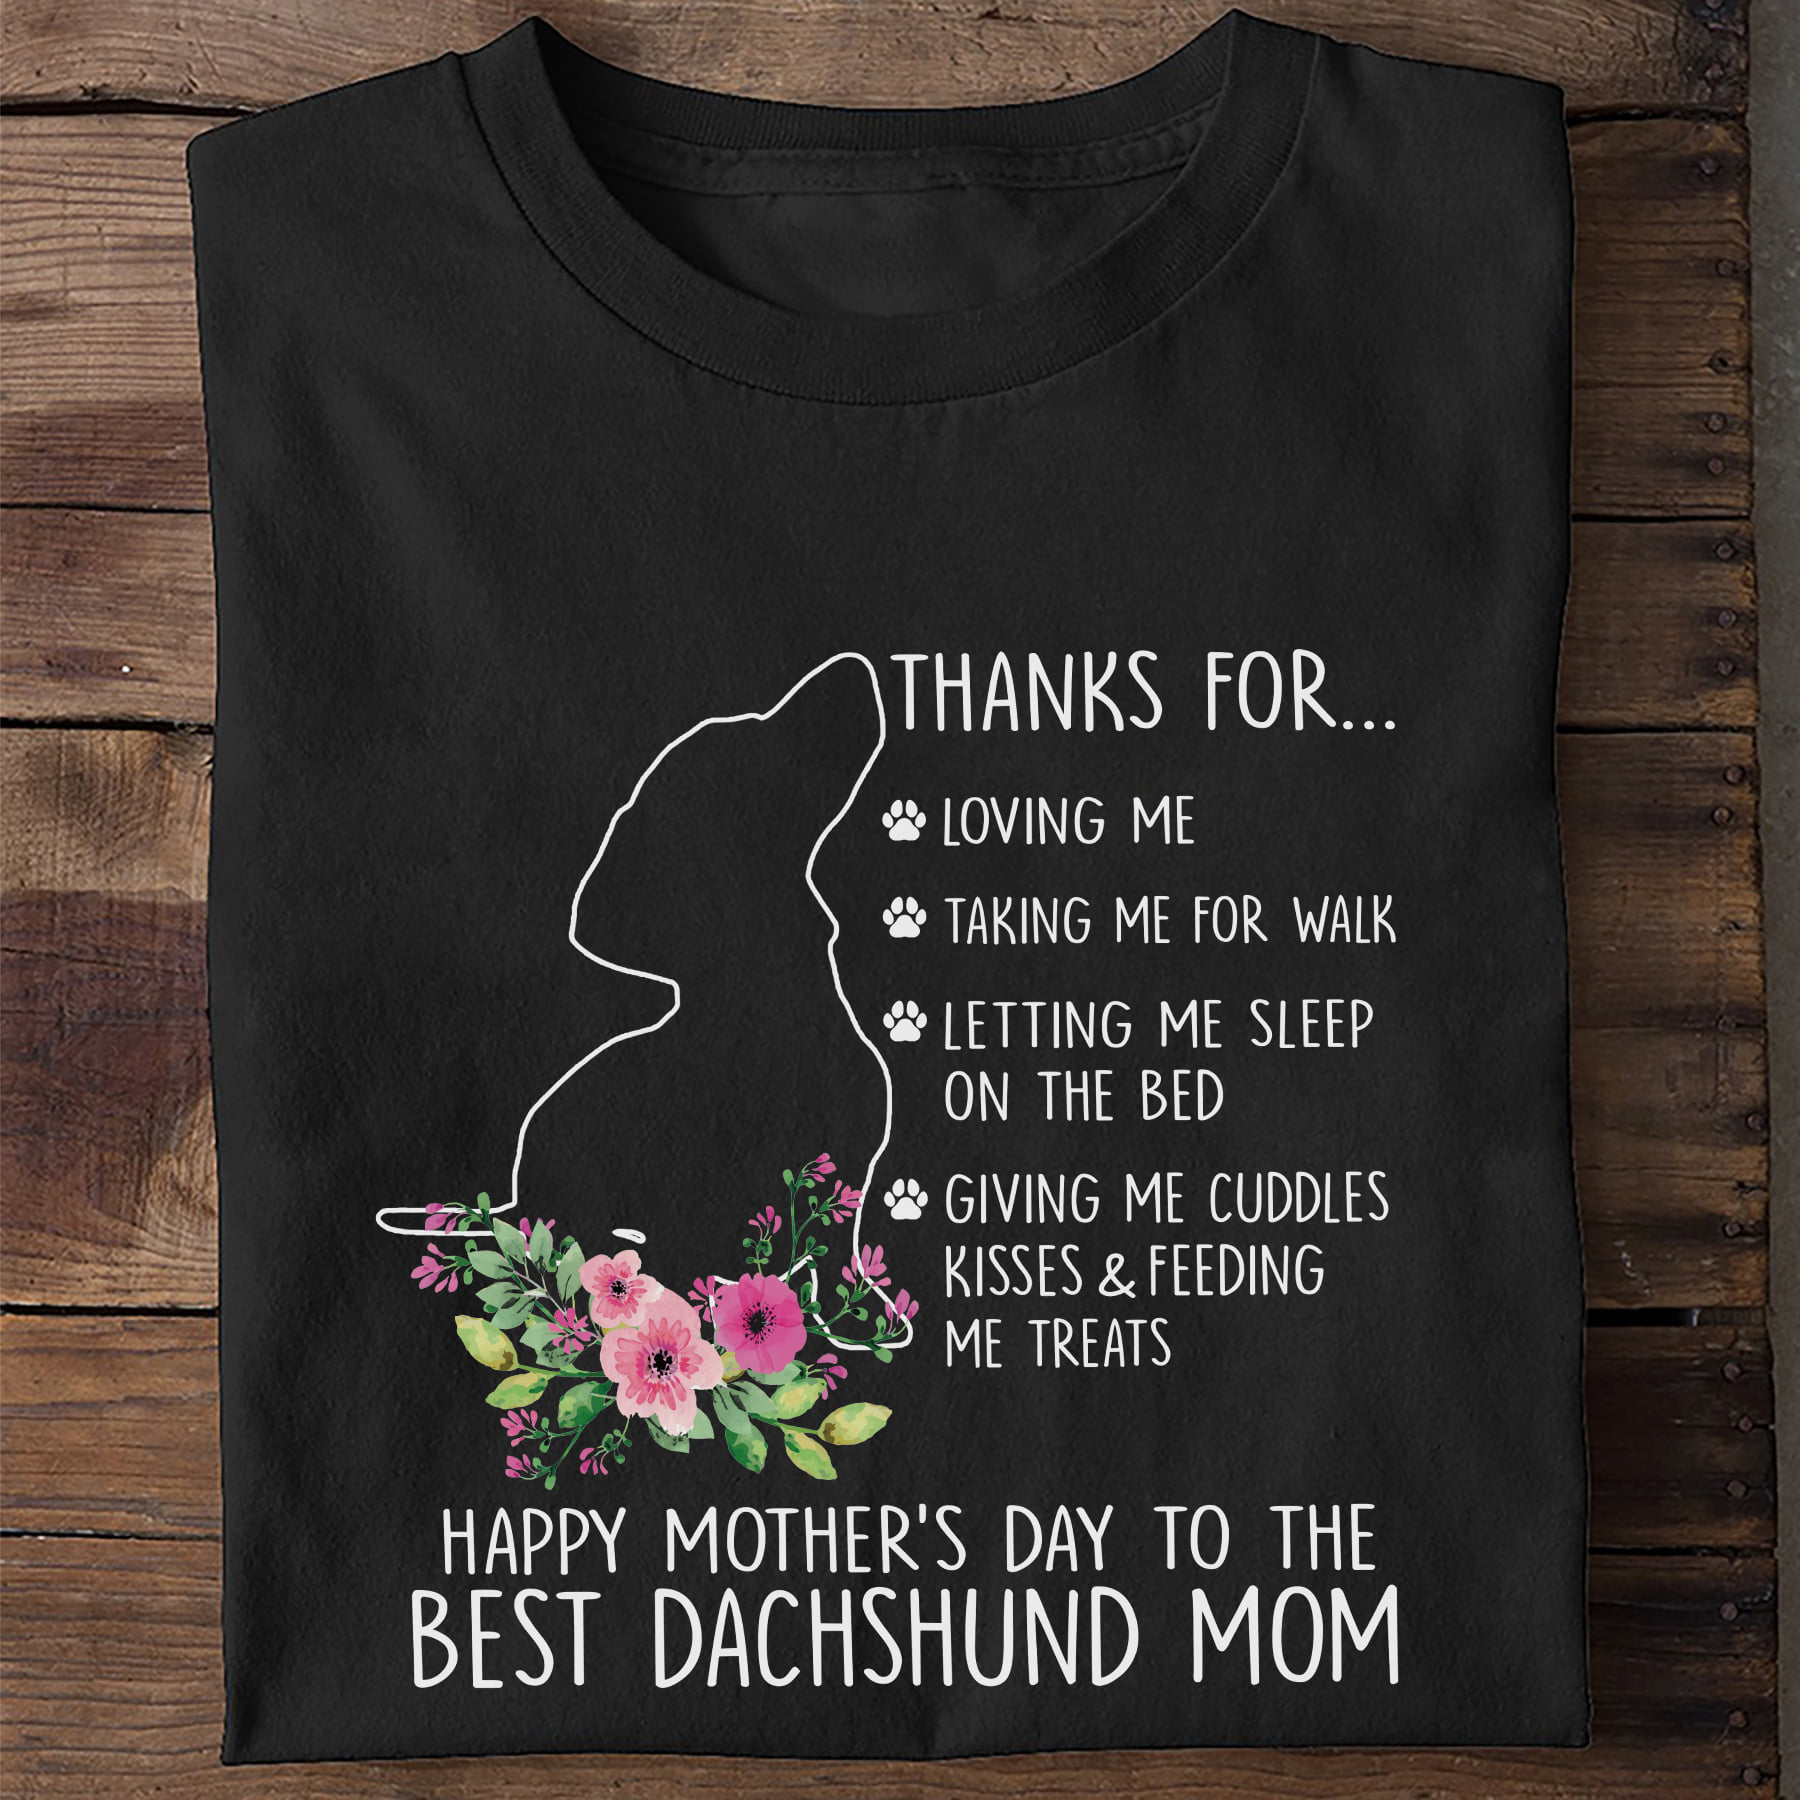 Thanks for loving me, talking me for walks - Happy mother's day to the best Dachshund mom